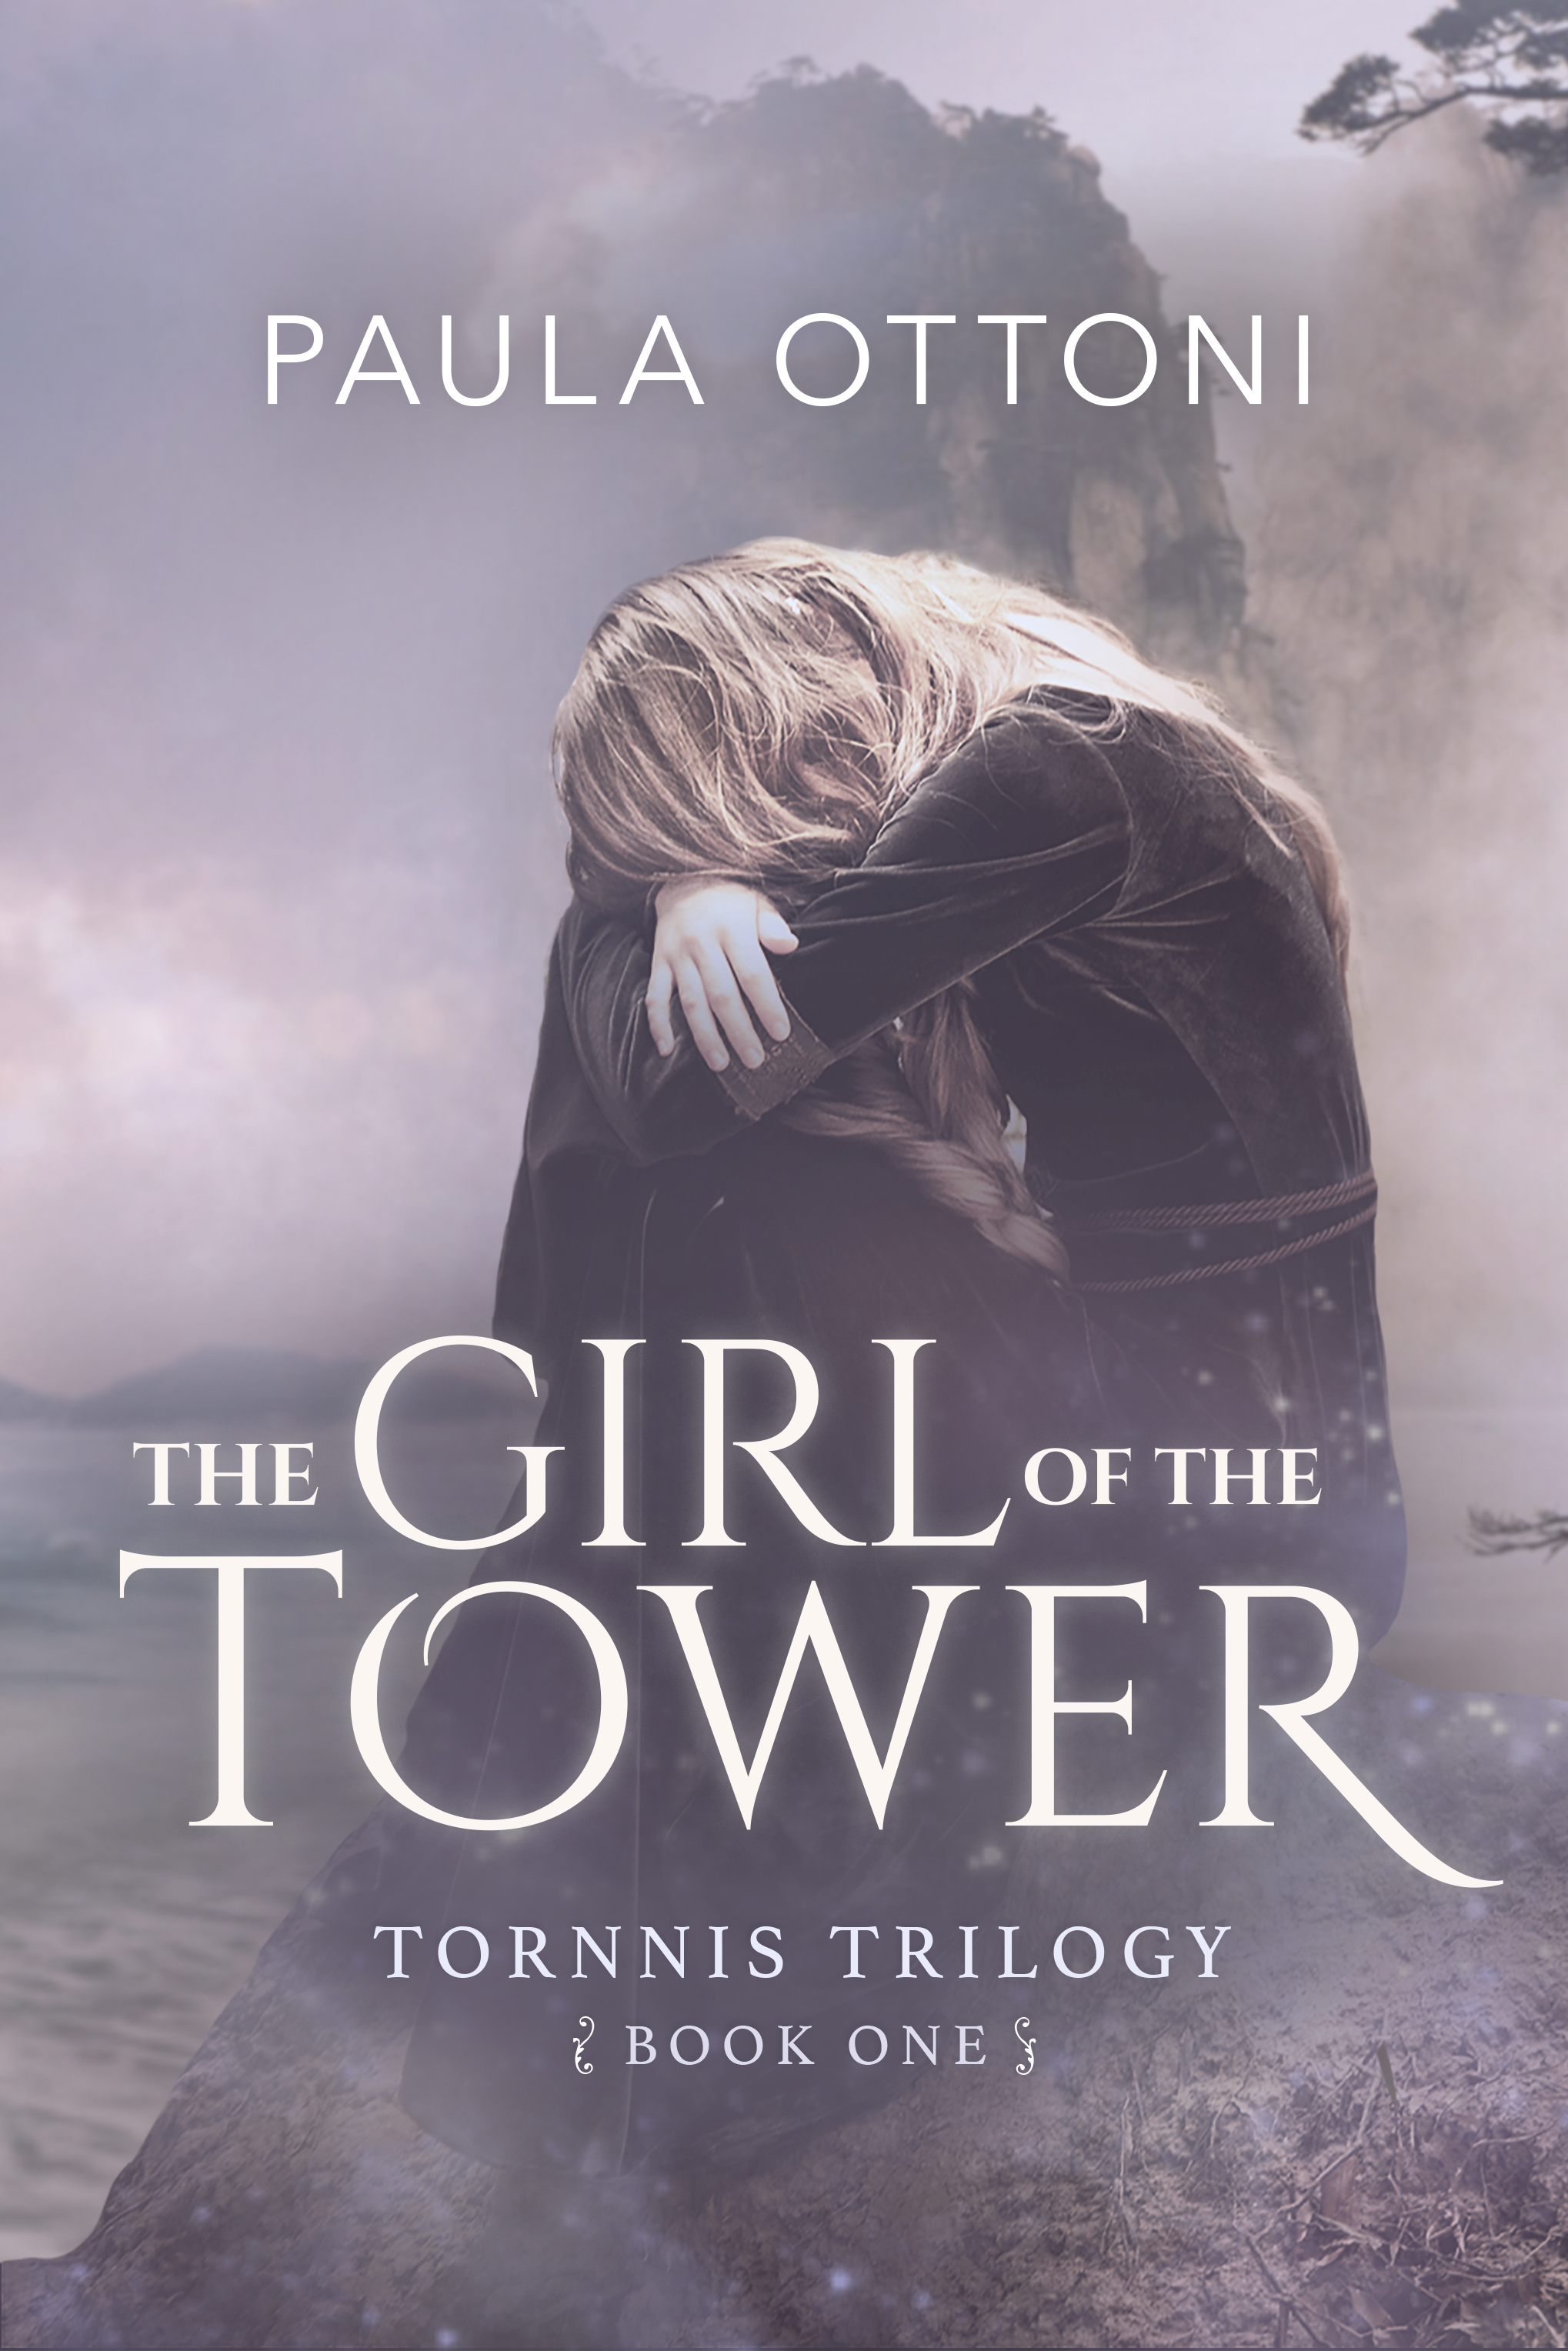 FREE: The Girl of the Tower by Paula Ottoni